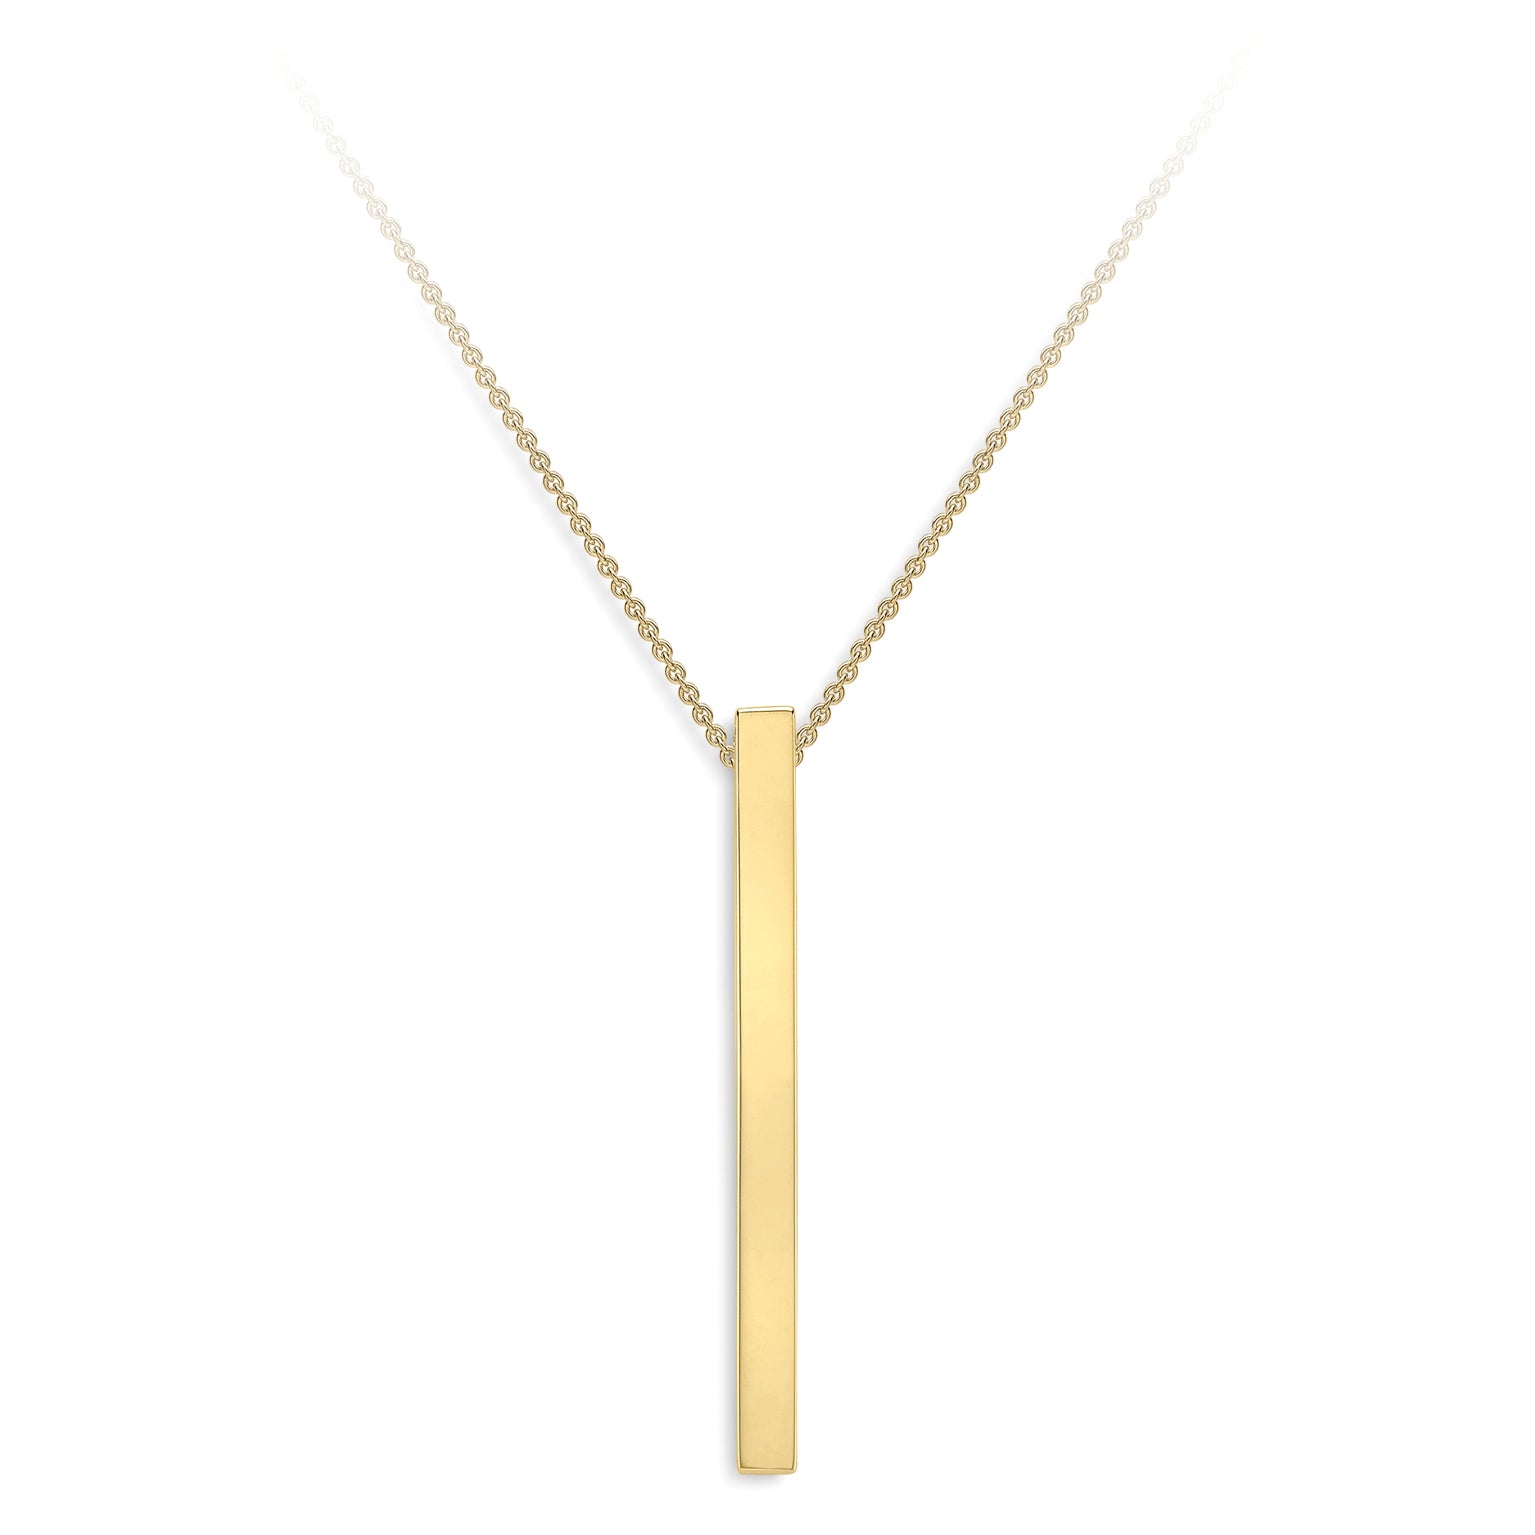 9ct Gold  Vertical ID Bar Necklace - CNNR02135-17